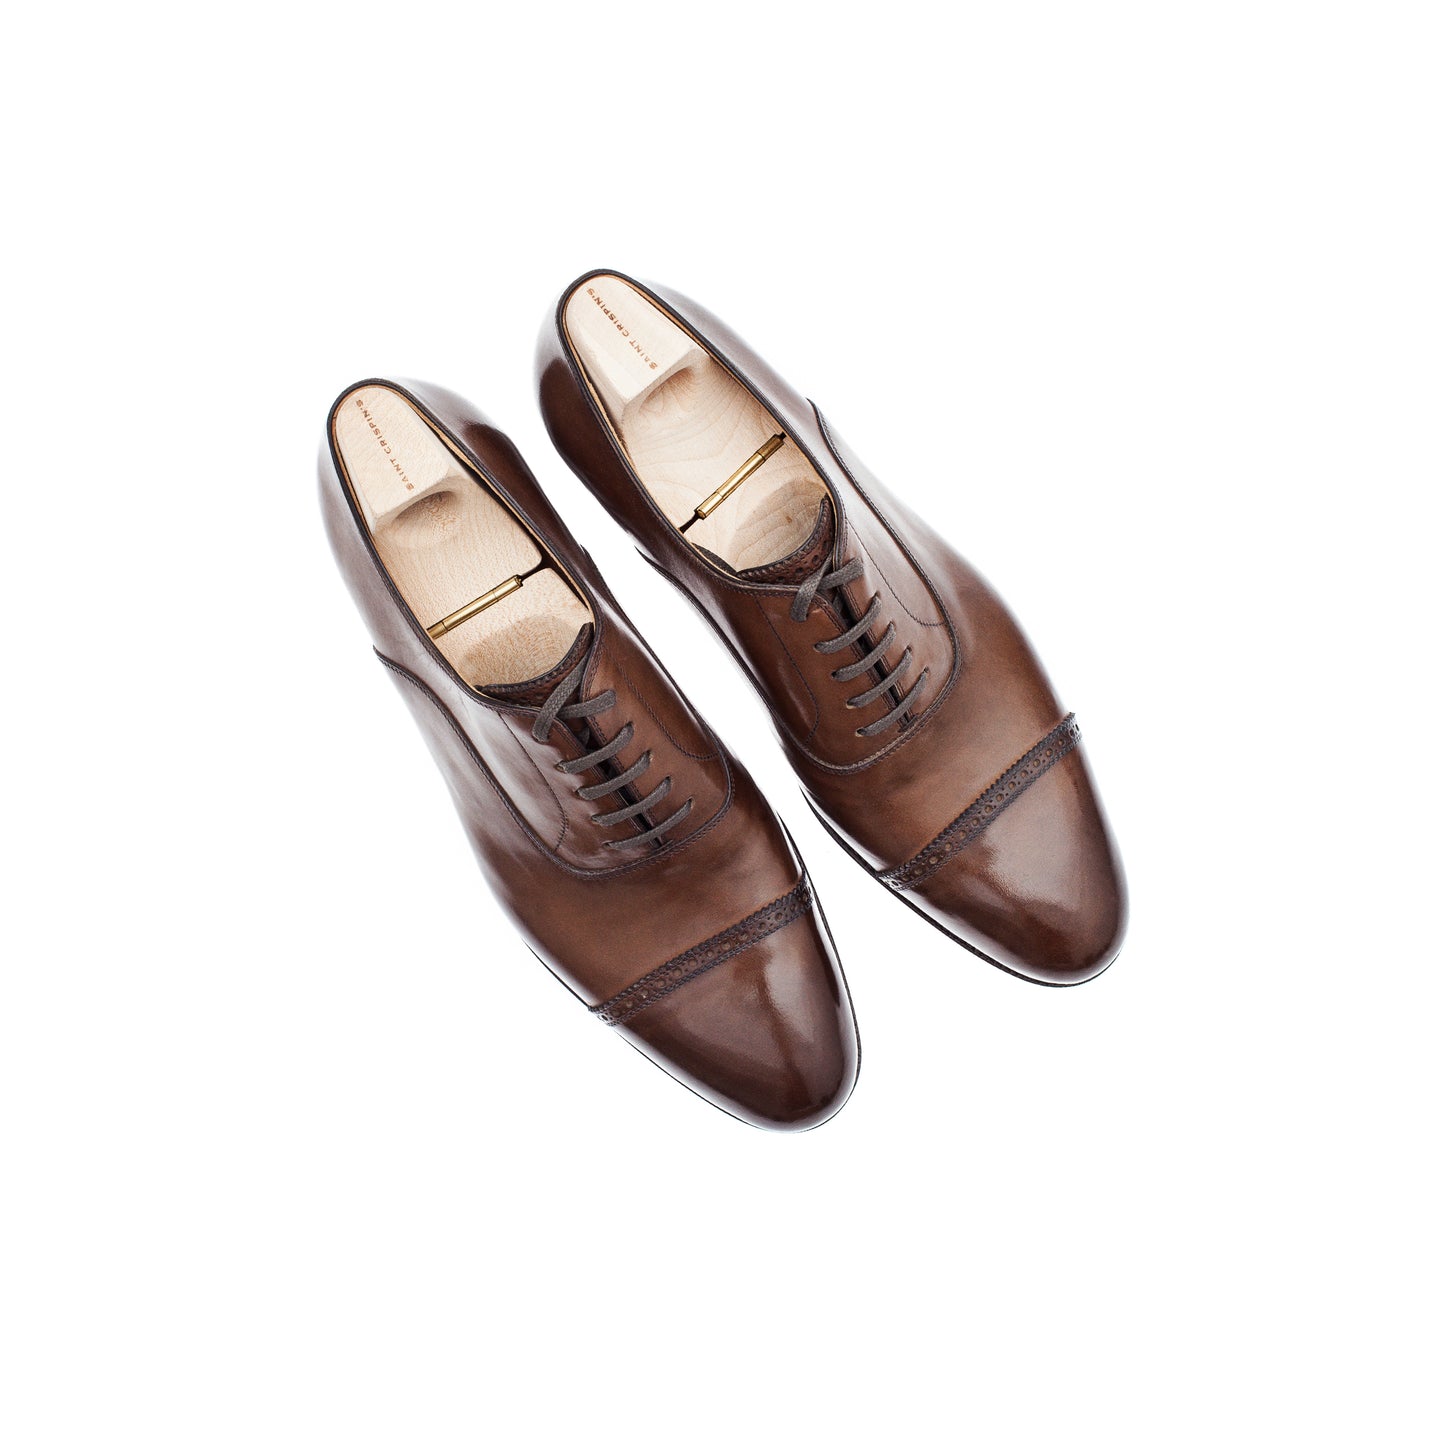 Oxford with straigh cap toe, gimped